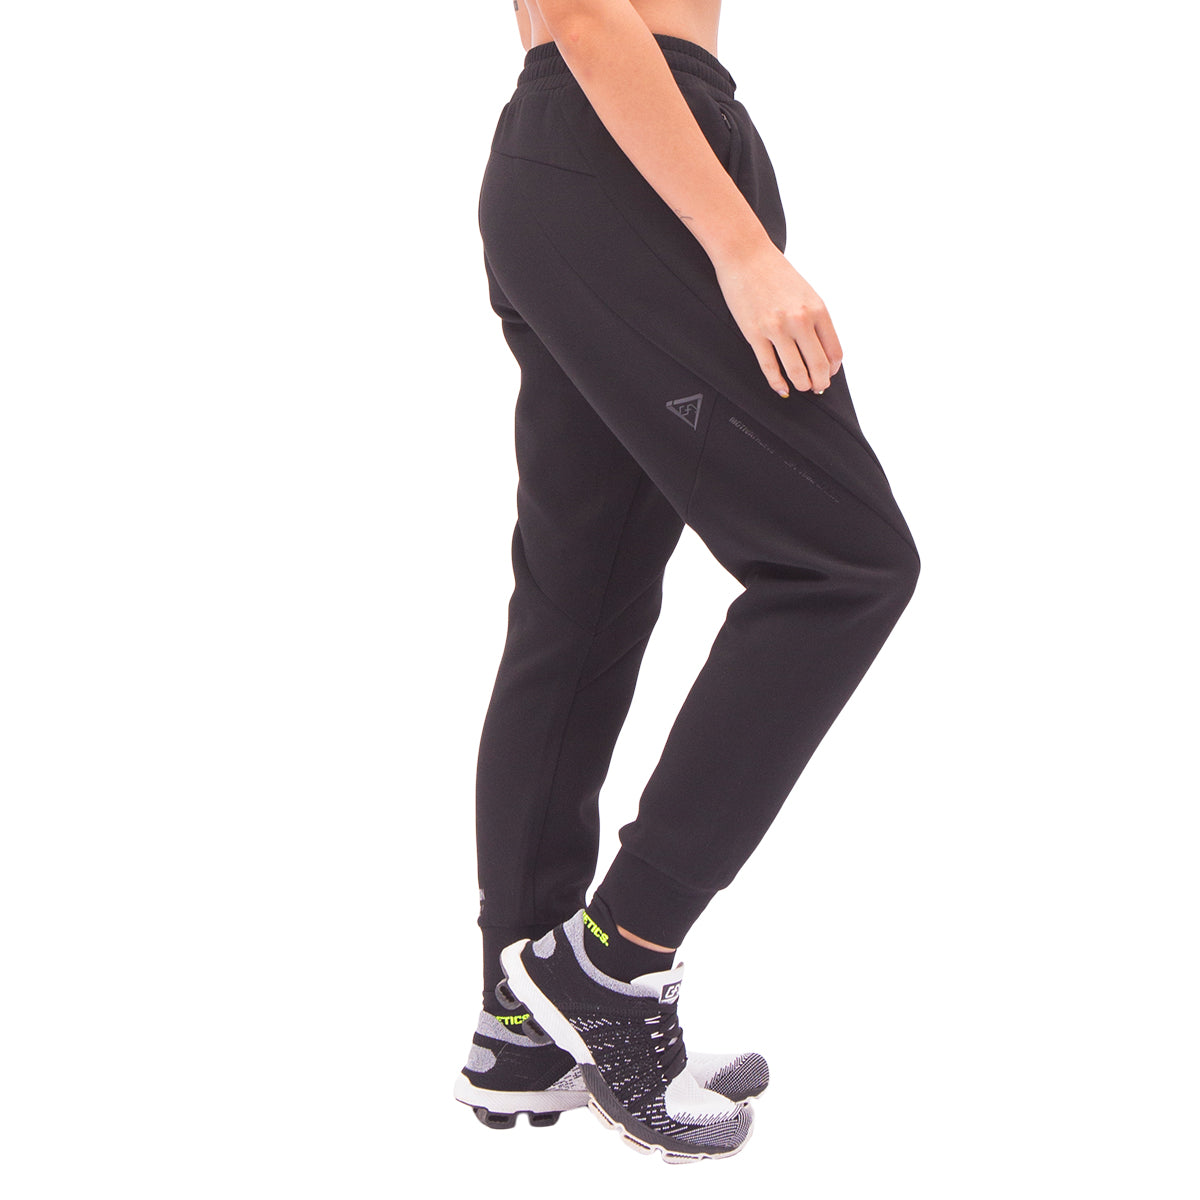 Athleisure Wicking Workout Jogger pants for Women